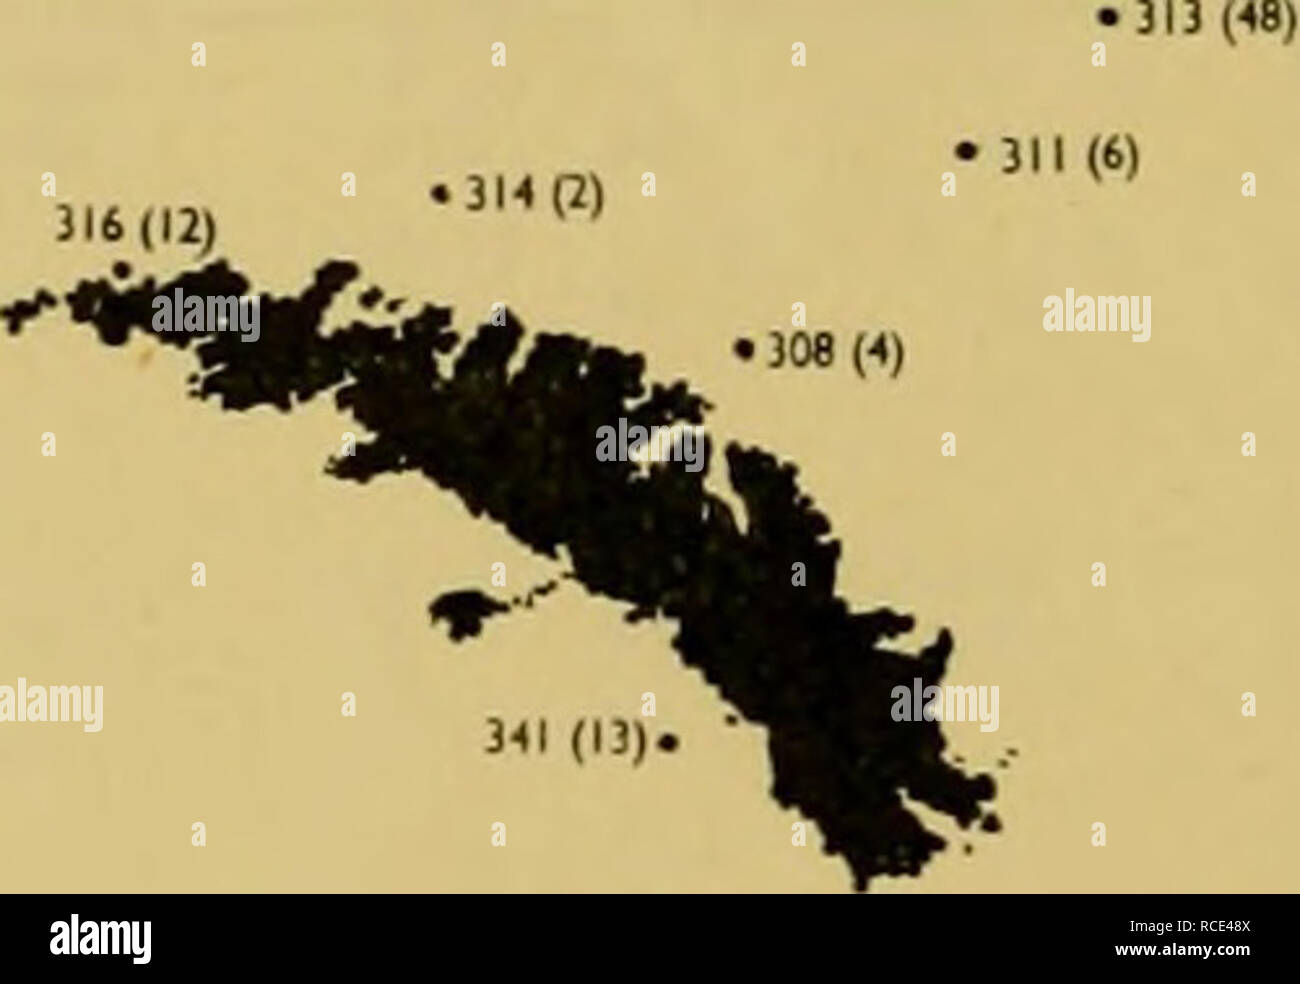 . Discovery reports. Discovery (Ship); Scientific expeditions; Ocean; Antarctica; Falkland Islands. â -! 1 â¢ WS 47 1190)^ â¢ WS 49 (61) ^ 1 â¢ 309(B) â¢ WS 22 (43) - T&amp; SS'S WS43 (161) 1 â 338 (2) 1 â¢WS34(I) â¢WS35|3) -344 (I) ] s sj- s - 1 â¢ WS 160 (St. ! - S â WS I66(l| .WS I6S(25) â¢ WS 164(1) â¢ WS 163(20) &quot;*% â¢ WS 4S(1) NO NTOV NETS INTHISStCTO* 1 1 â¢WS 173 (1) 1 1 â¢ WS 180(7) â WS 182 (6) - Fig- 37 Fig. 38 â¢30* (I). â¢3S6(I9)- *336 (M)- â¢&quot;5(1) Fig- 39 â¢ WS 167 (3) â¢ WS 165(111 â¢ WS 164(2) â¢ WS 160(2) â¢ WS 158(2) â¢ WS 156(3). Please note that these images are e Stock Photo